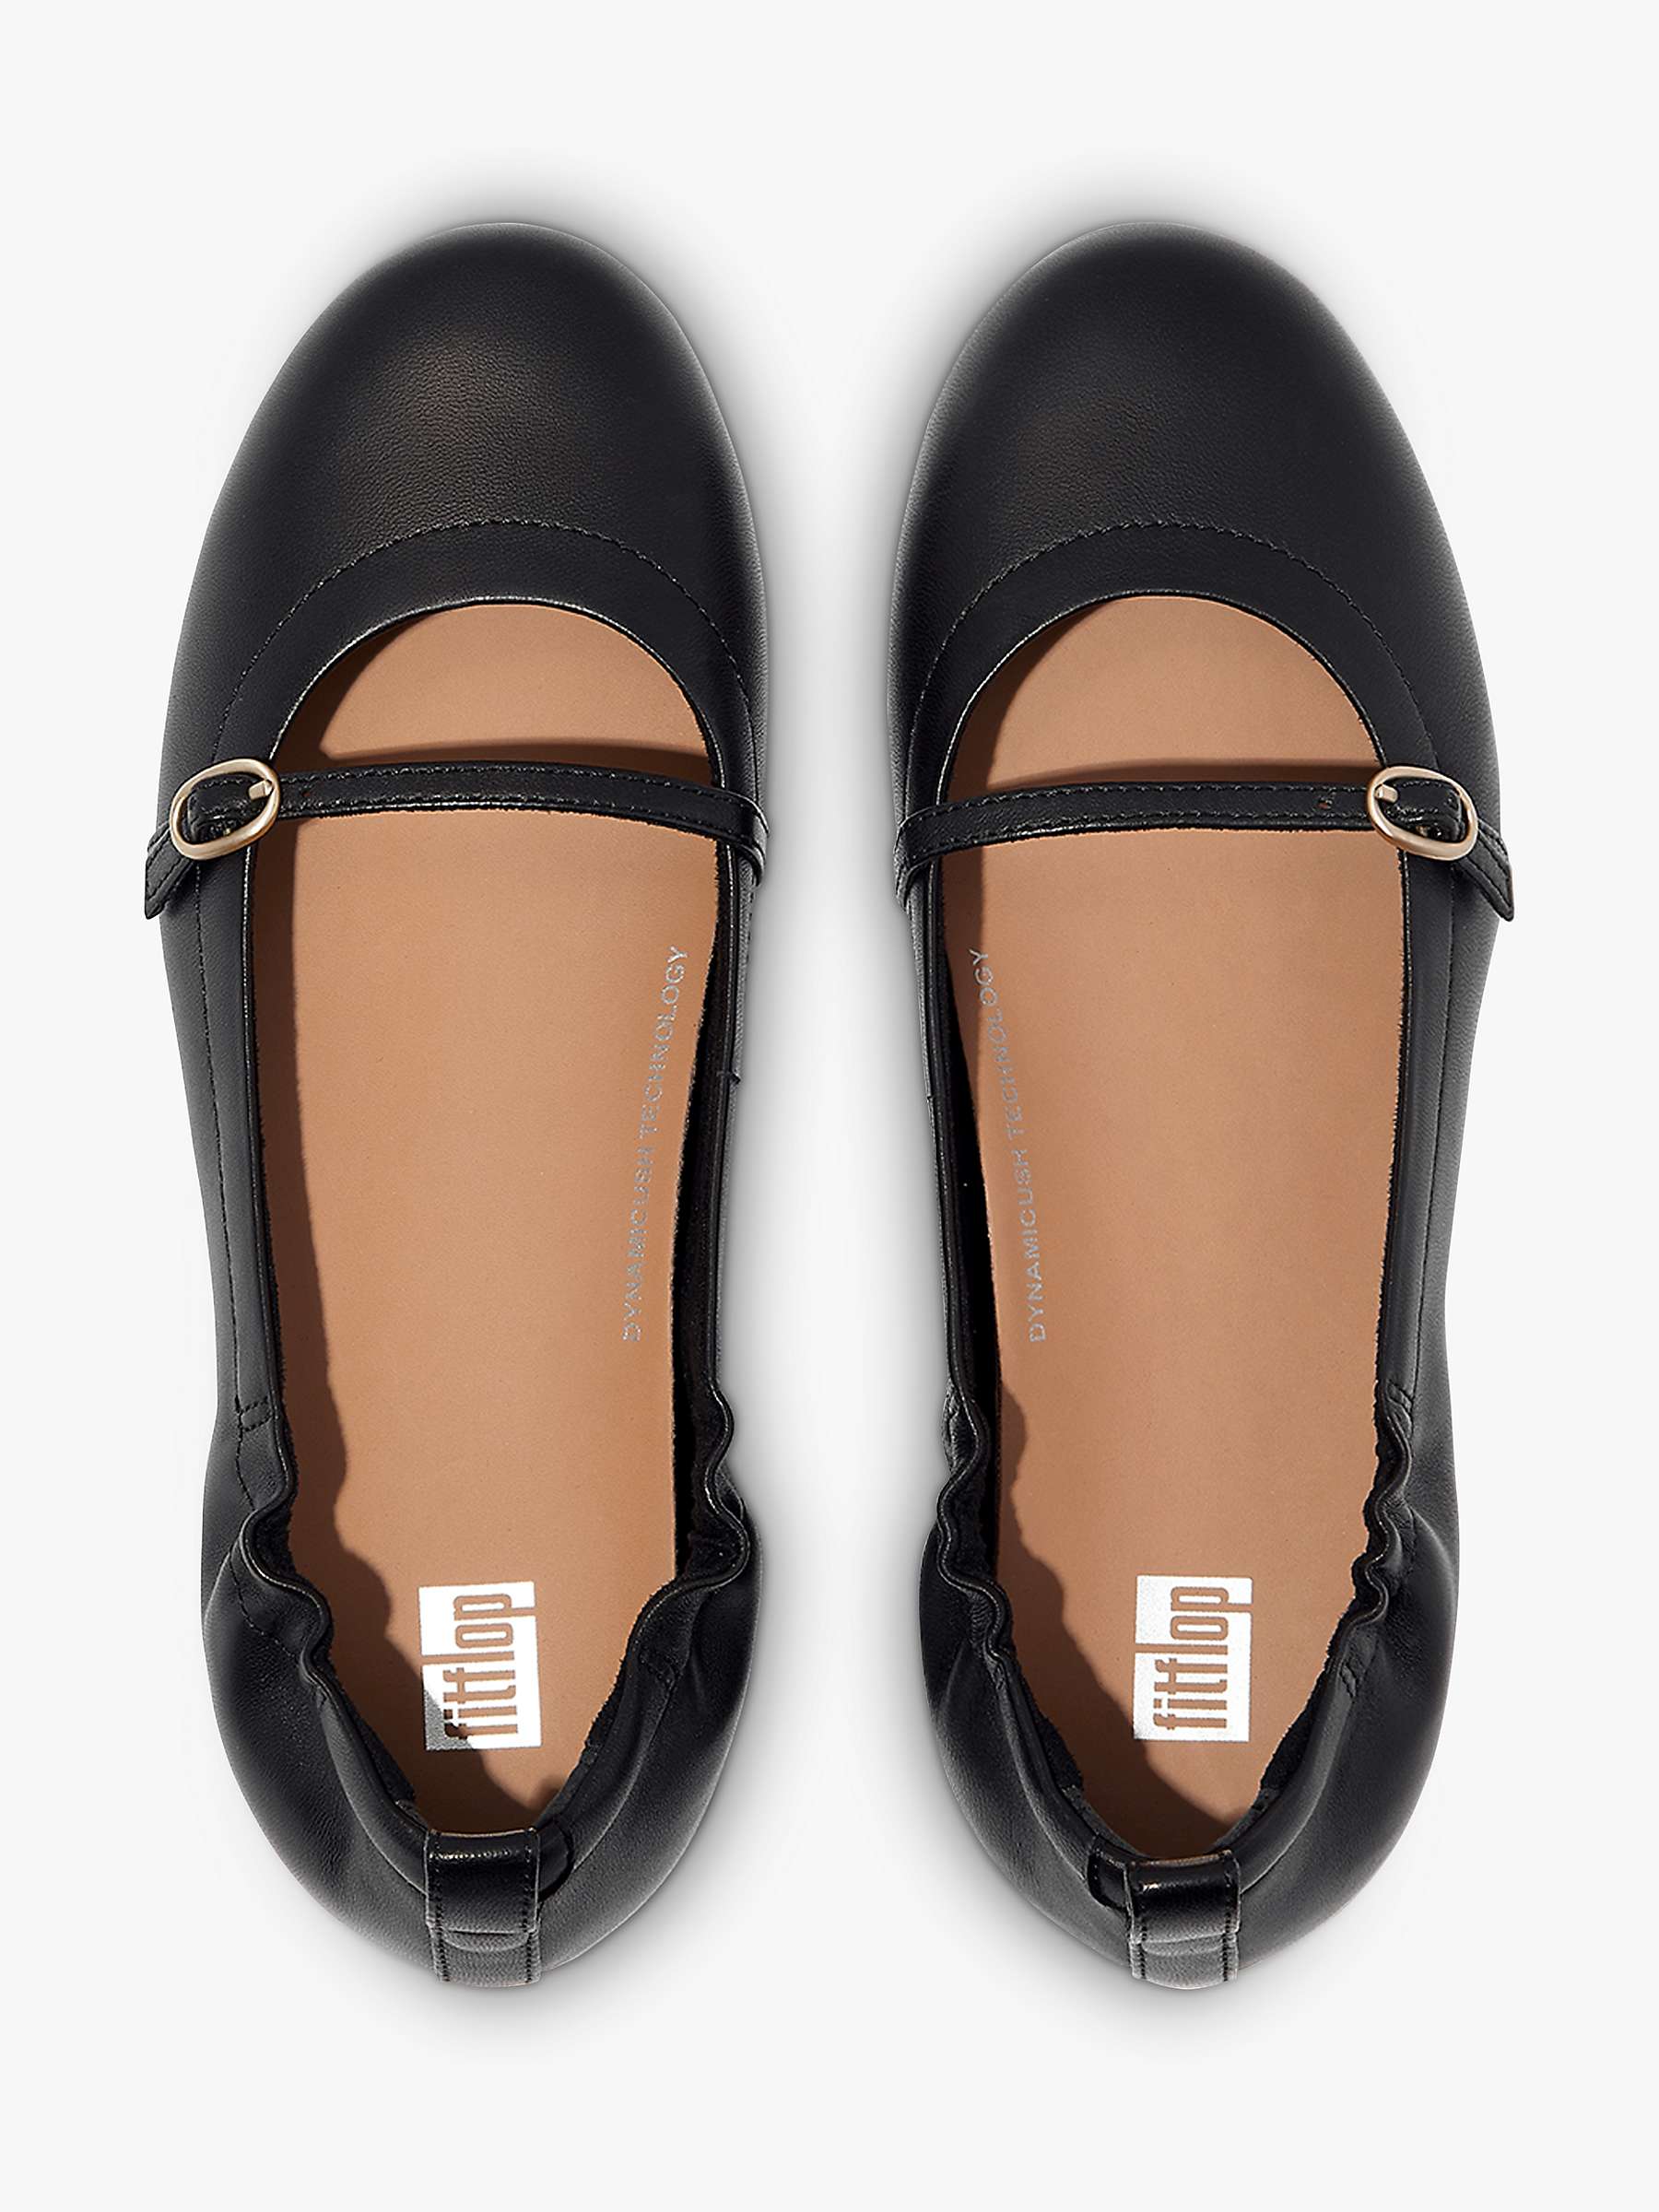 Buy FitFlop Allegro Buckle Mary Jane Leather Shoes, Black Online at johnlewis.com